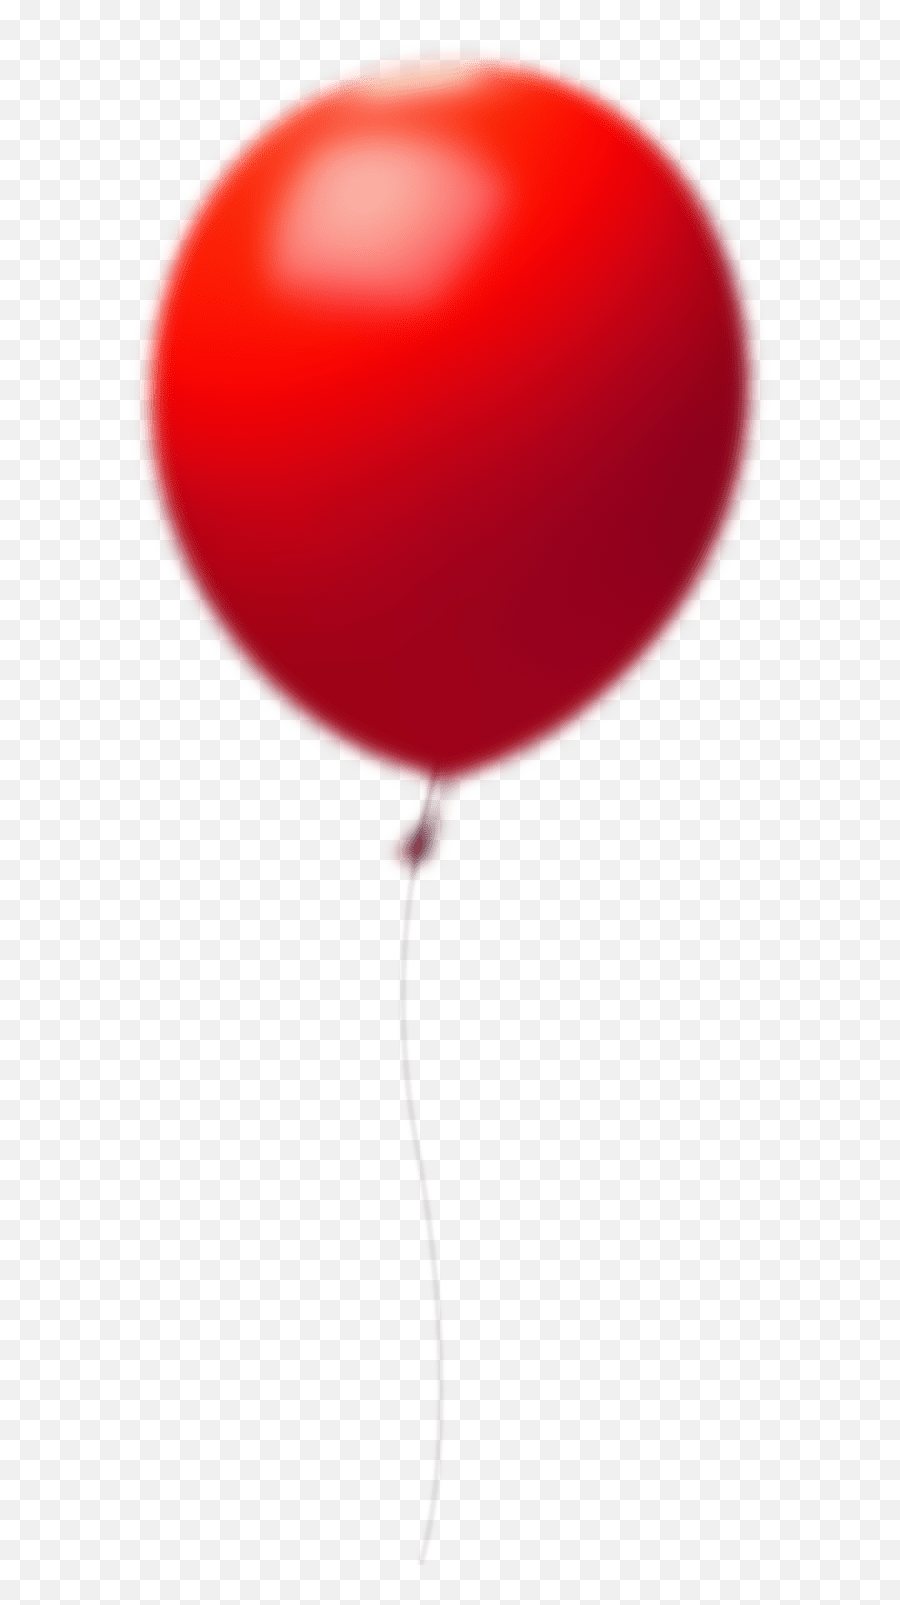 Balloon Png Image With No Background - Balloon,Balloon String Png